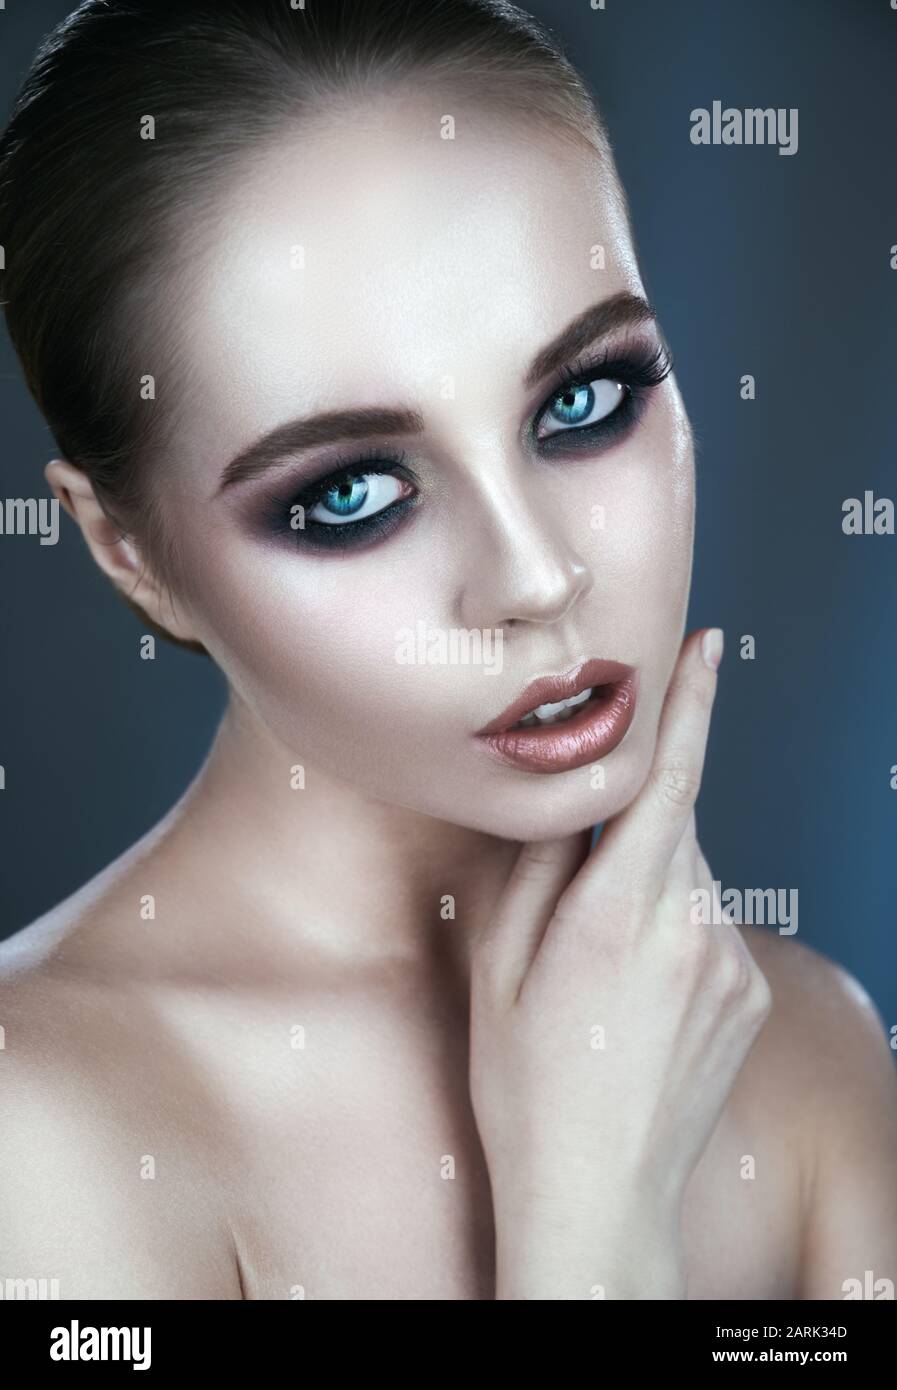 Close-up portrait of a beautiful young woman with smokey eyes and natural make-up Stock Photo